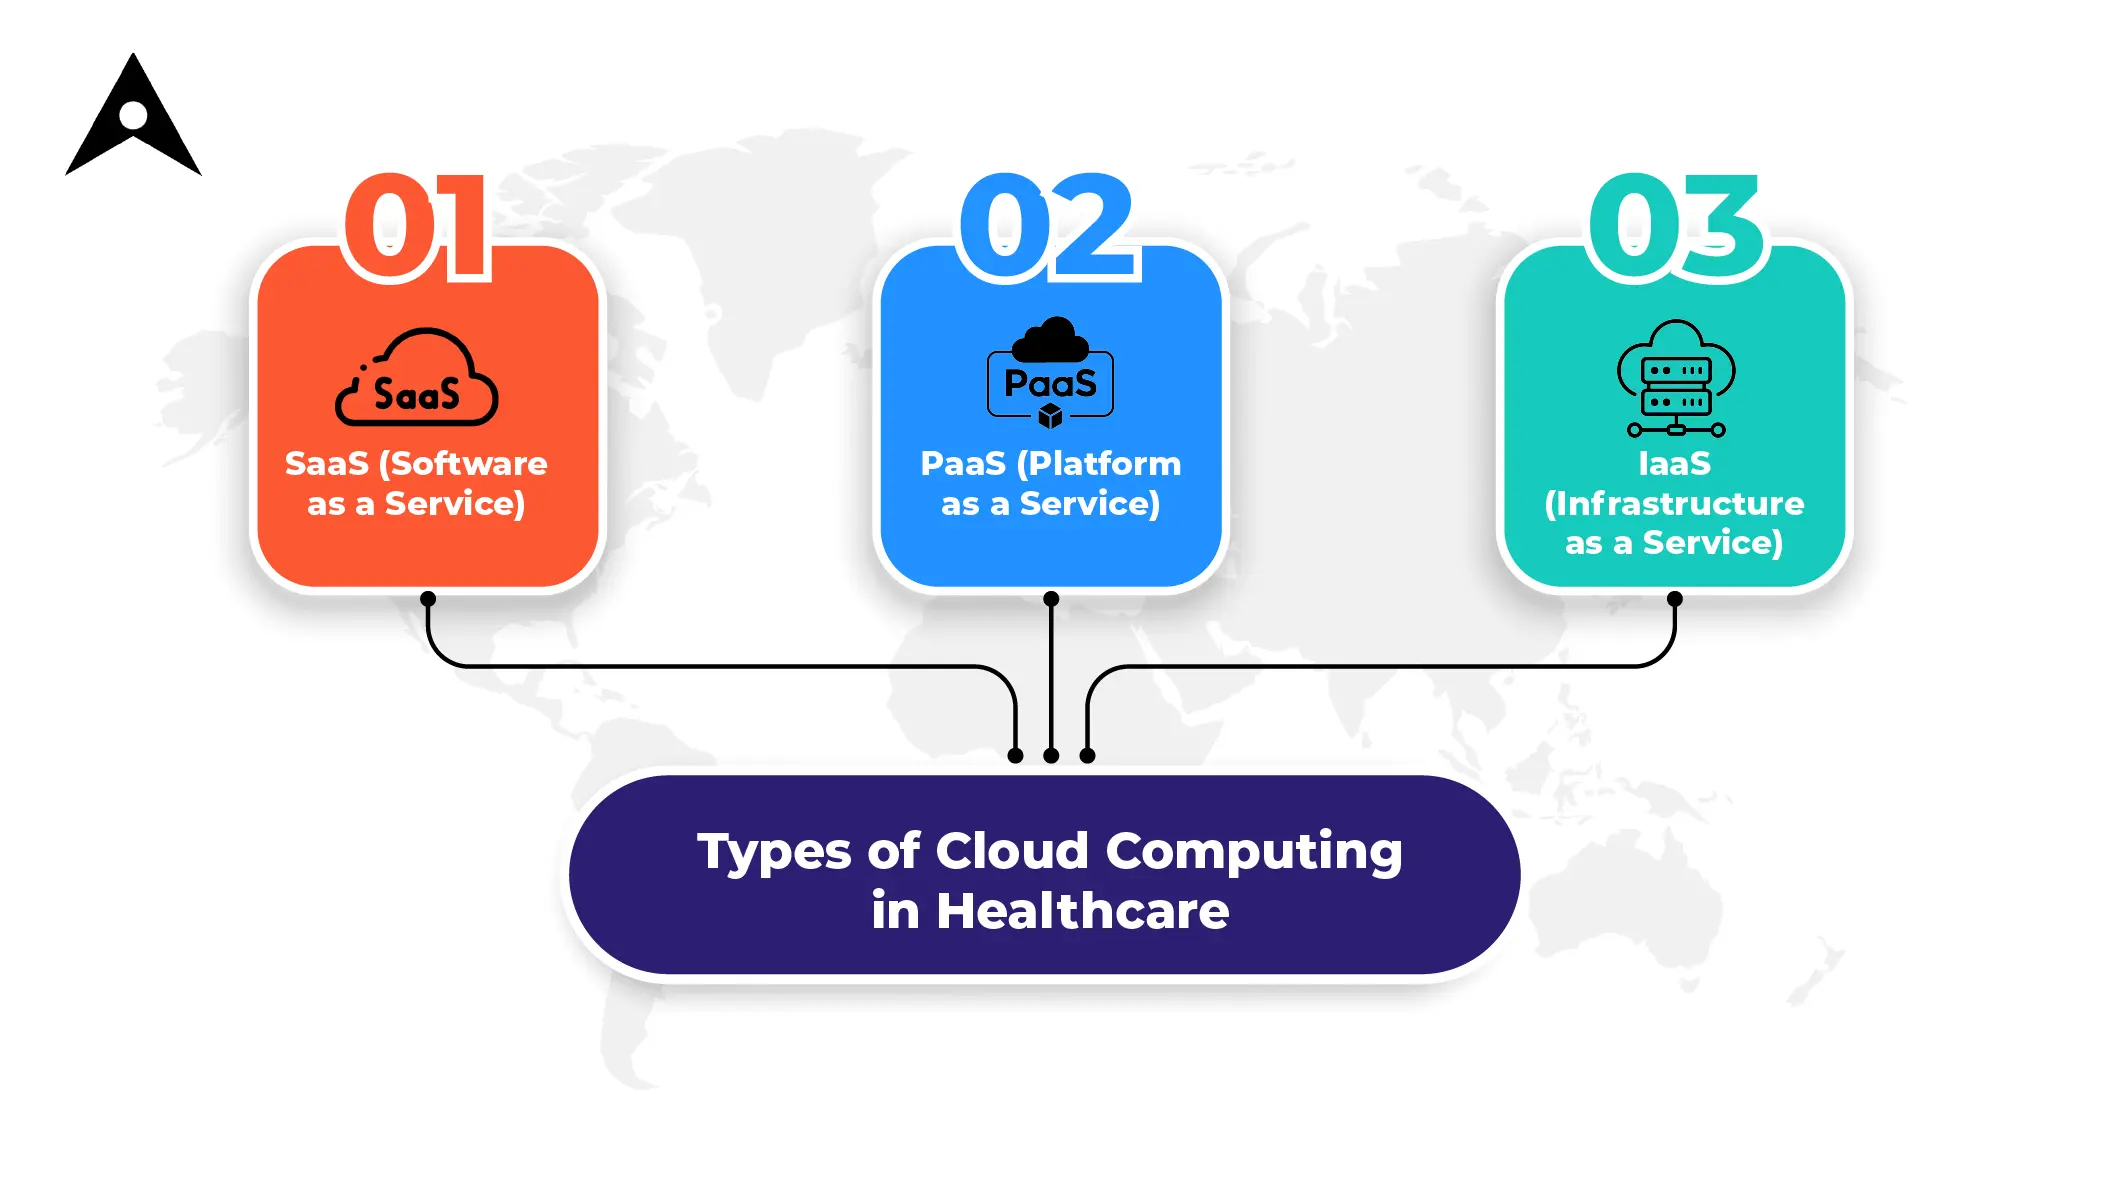 Types of Cloud Computing in Healthcare